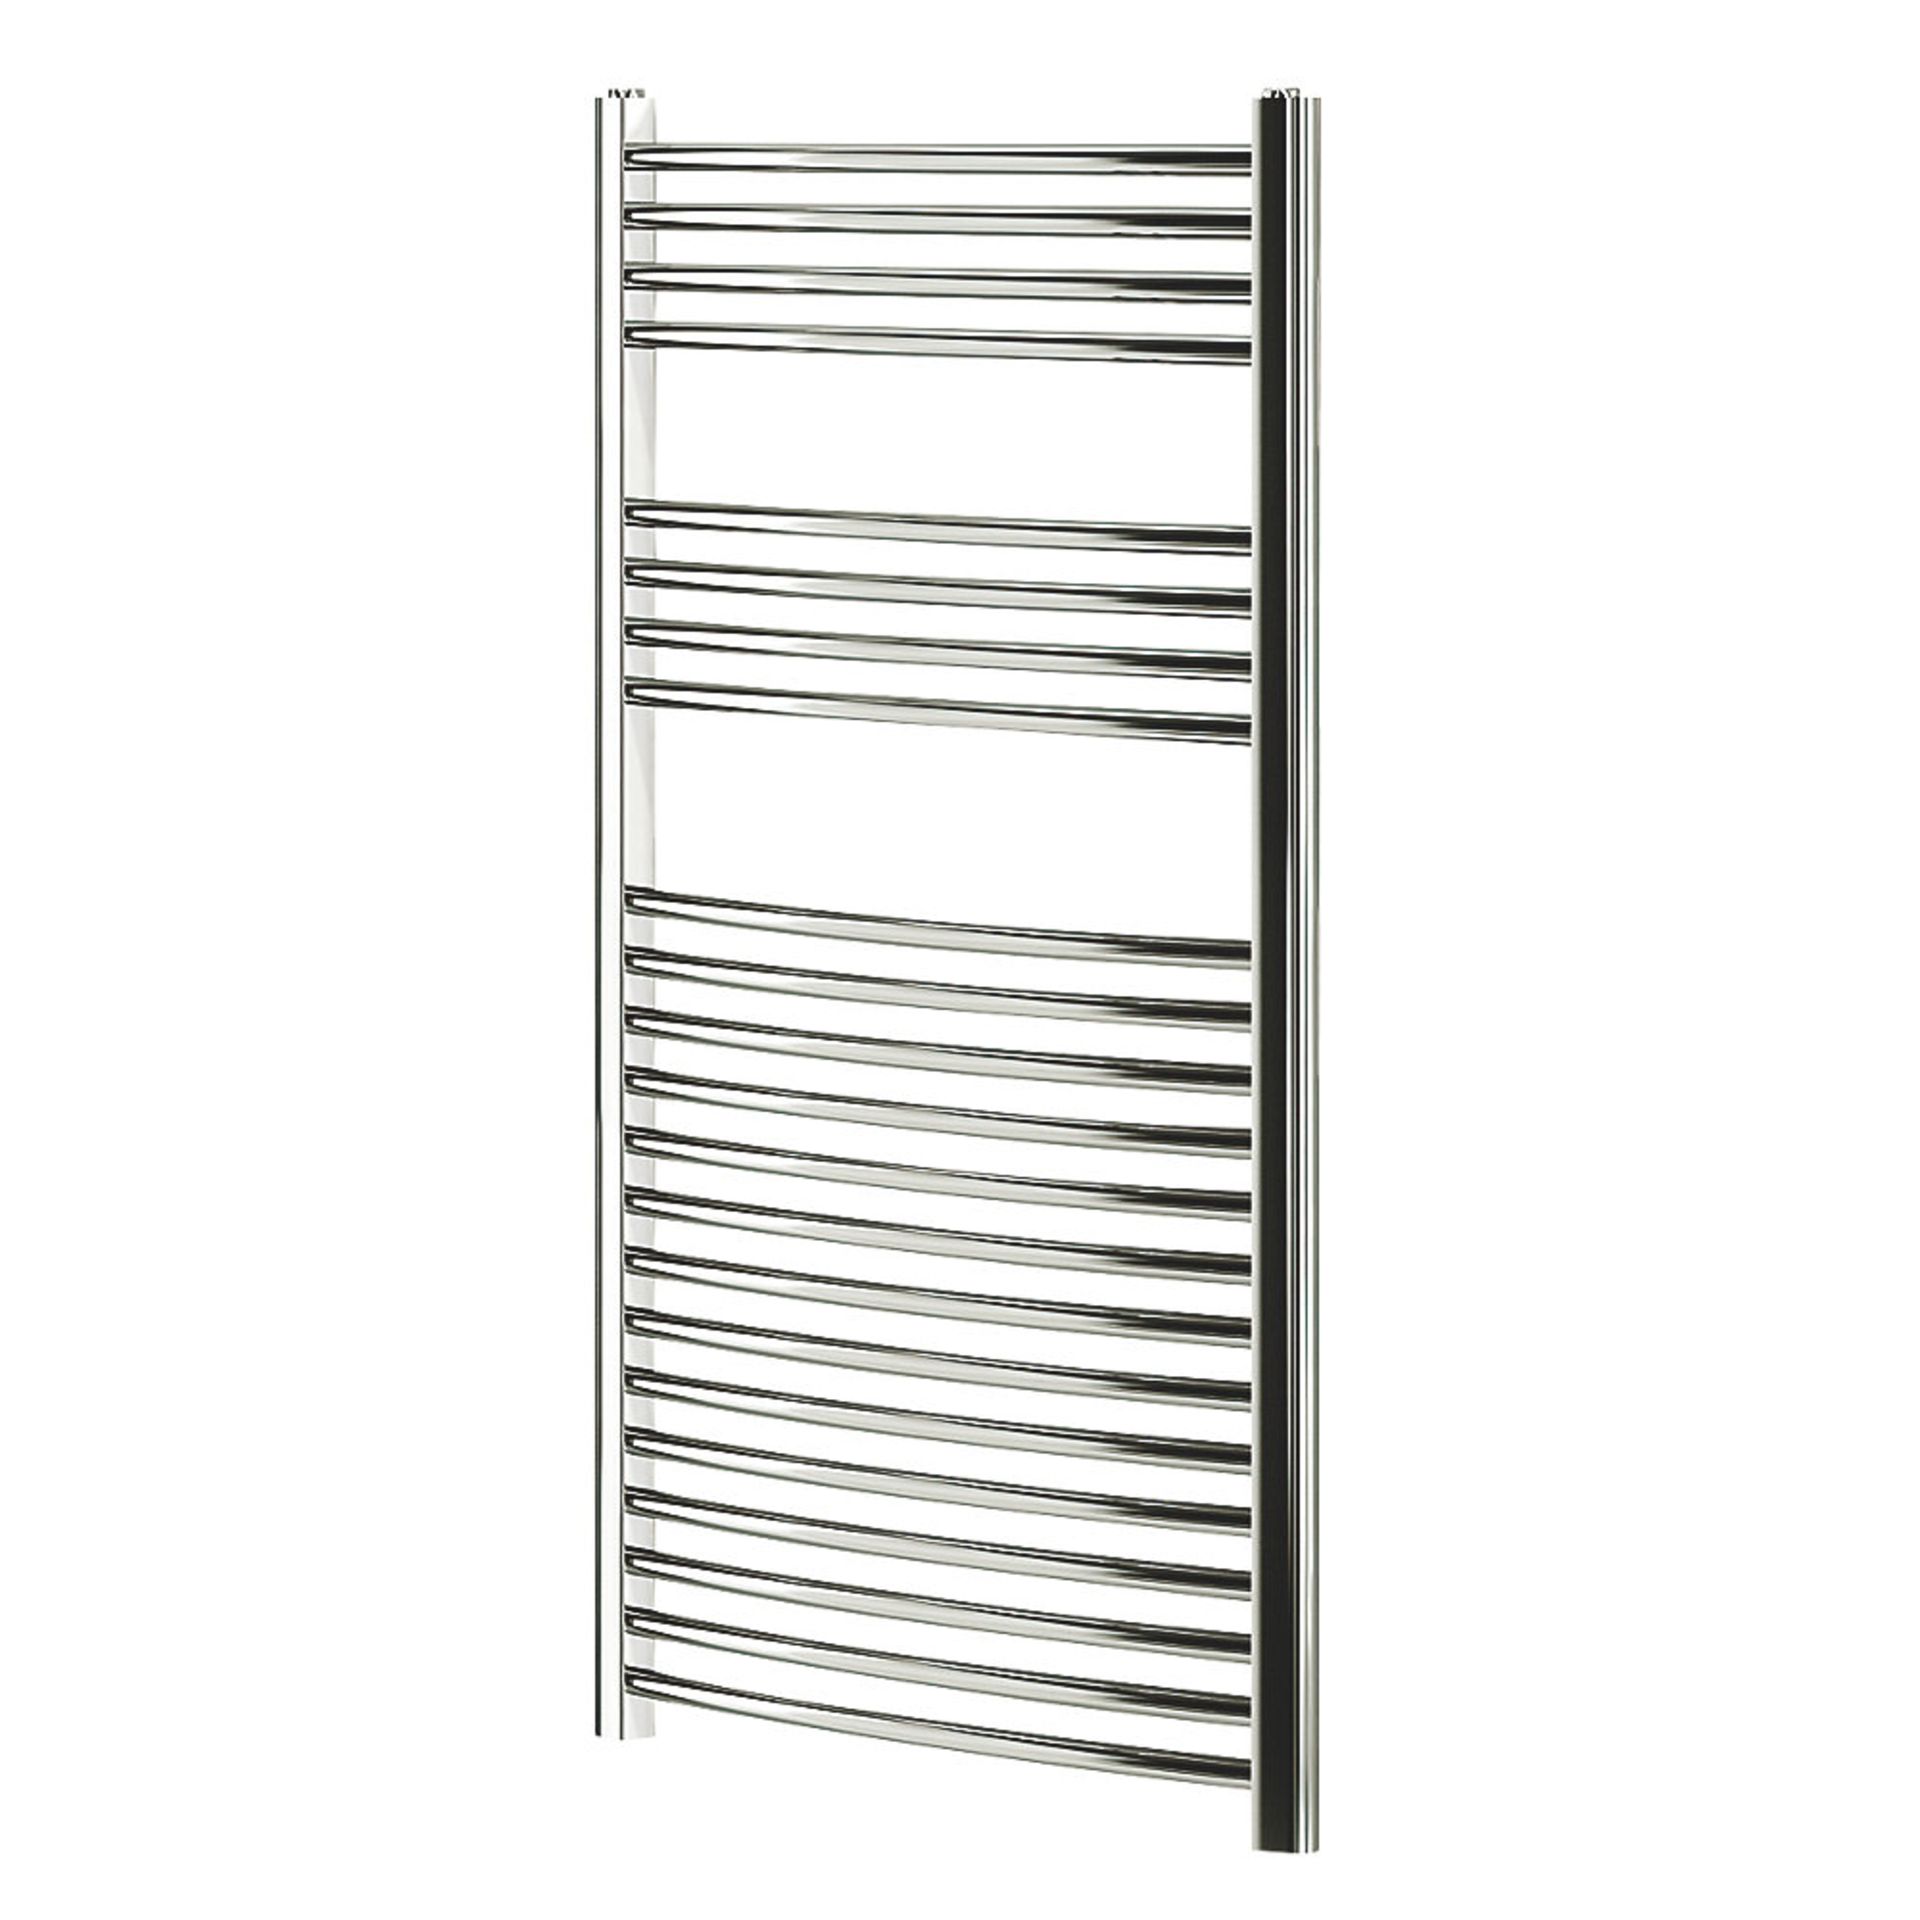 (MC212) 1100 X 600MM CURVED TOWEL RADIATOR CHROME. High quality chrome-plated steel construction. - Image 2 of 2